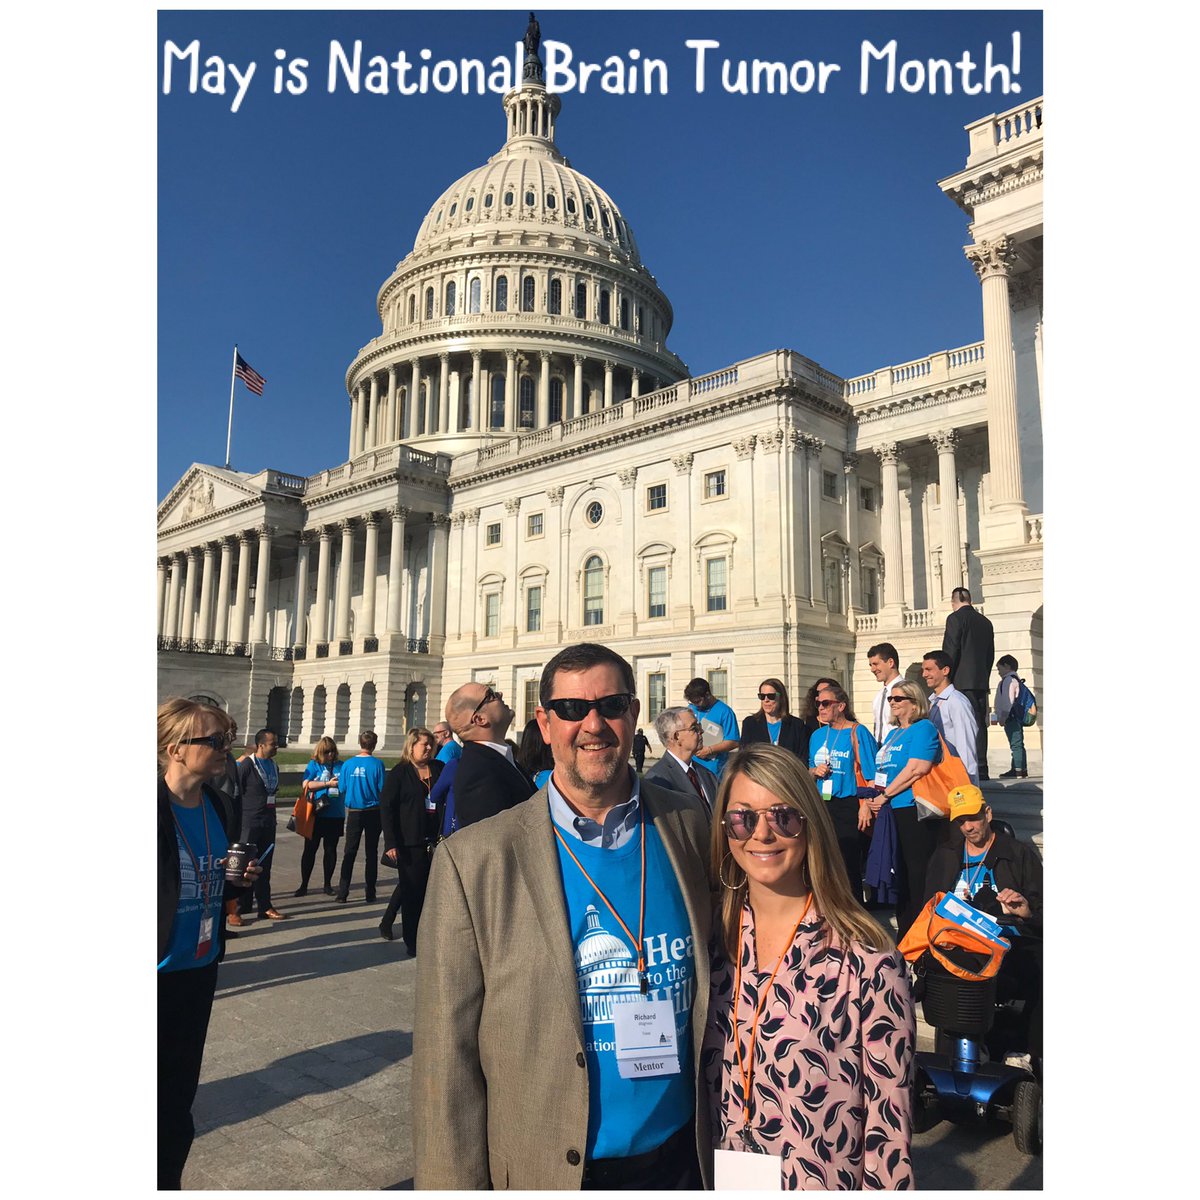 Did you know? An estimated 700,000 people in the United States are living with a primary brain tumor, and over 87,000 more will be diagnosed in 2020. 
#braintumor #braincancer #btam #btsm #gograyinmay #cancersucks #cancer #findacure #glioblastoma #gogreyinmay #braintumorawareness